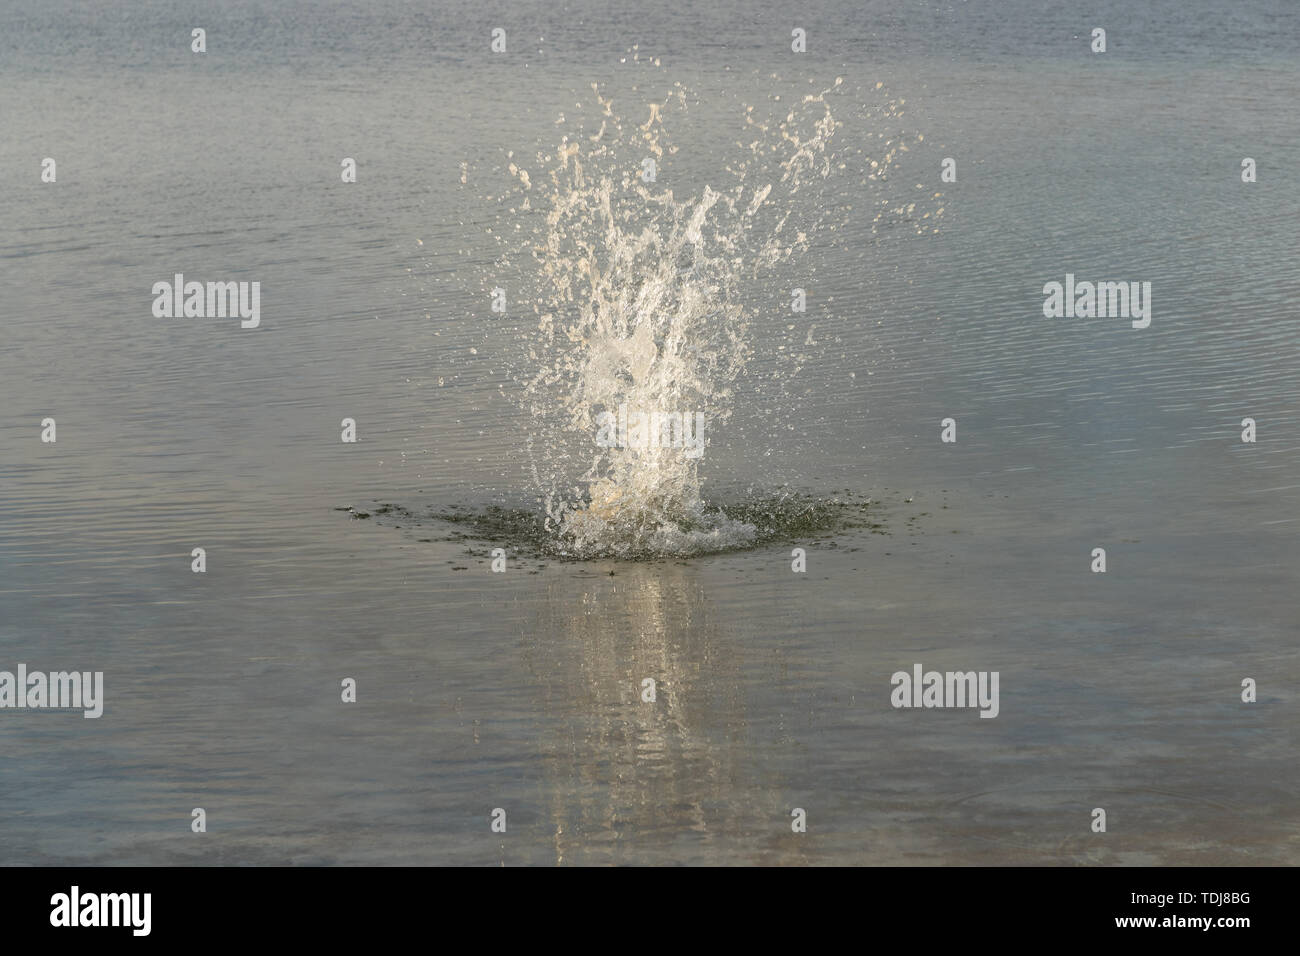 splashes from a stone that fell in the lake during the daytime Stock Photo